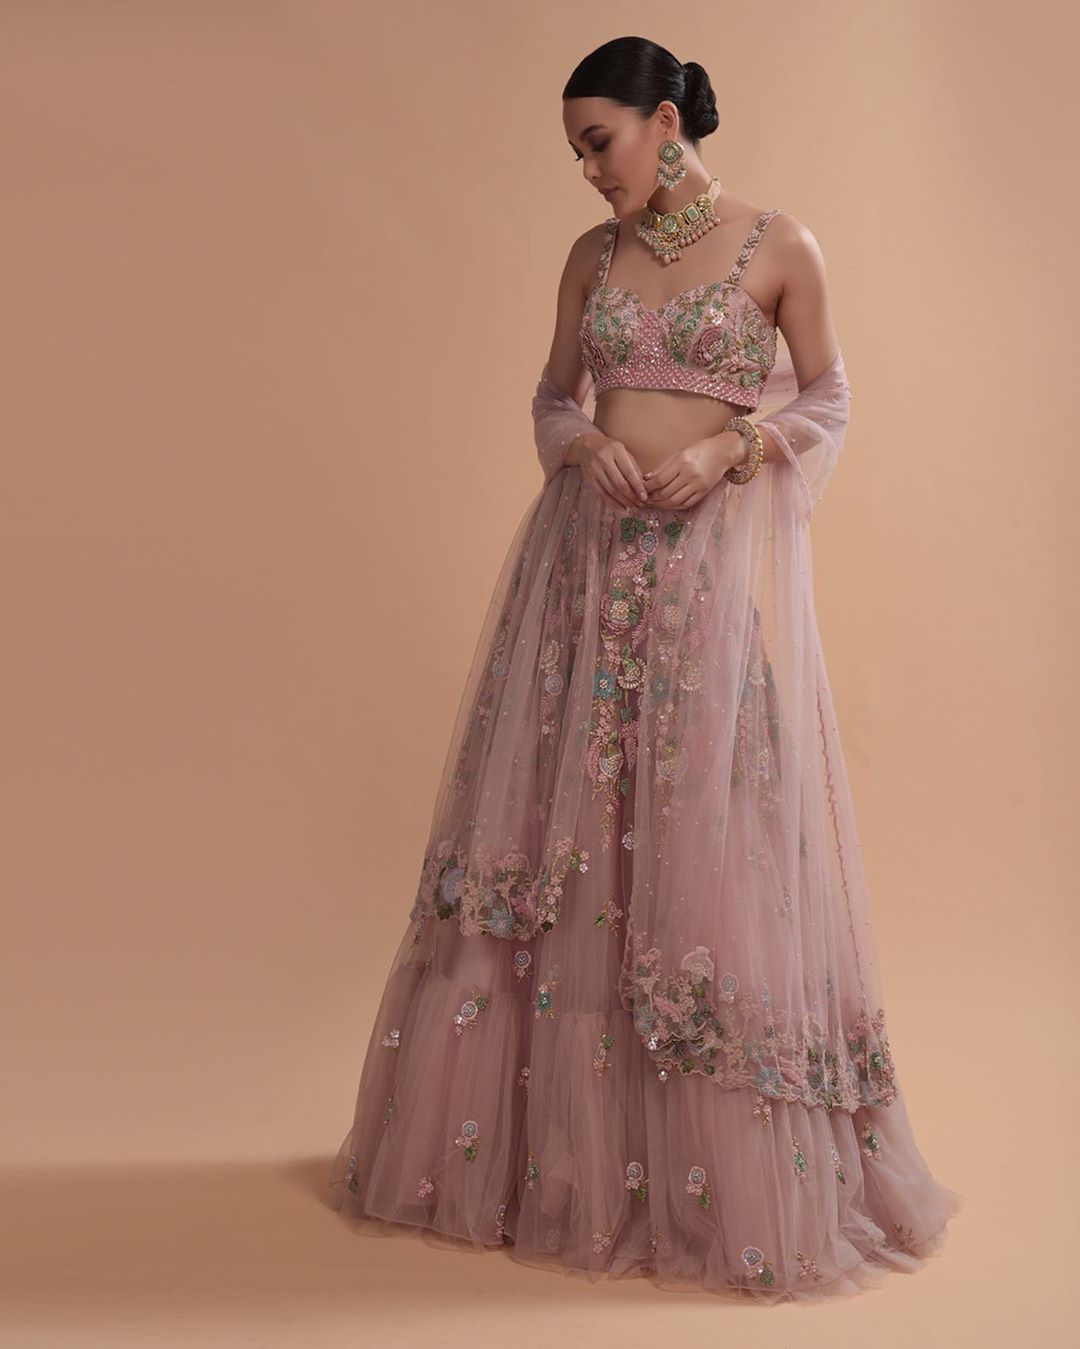 KALKI Fashion - #kalkixkesa🧚🏻
#TaleoftheIcyPinks🌸
With the perfect pop of icy pink hue, this uber stylish and totally Instagram worthy lehenga is for brides who LOVE taking pictures! Accompanied with...